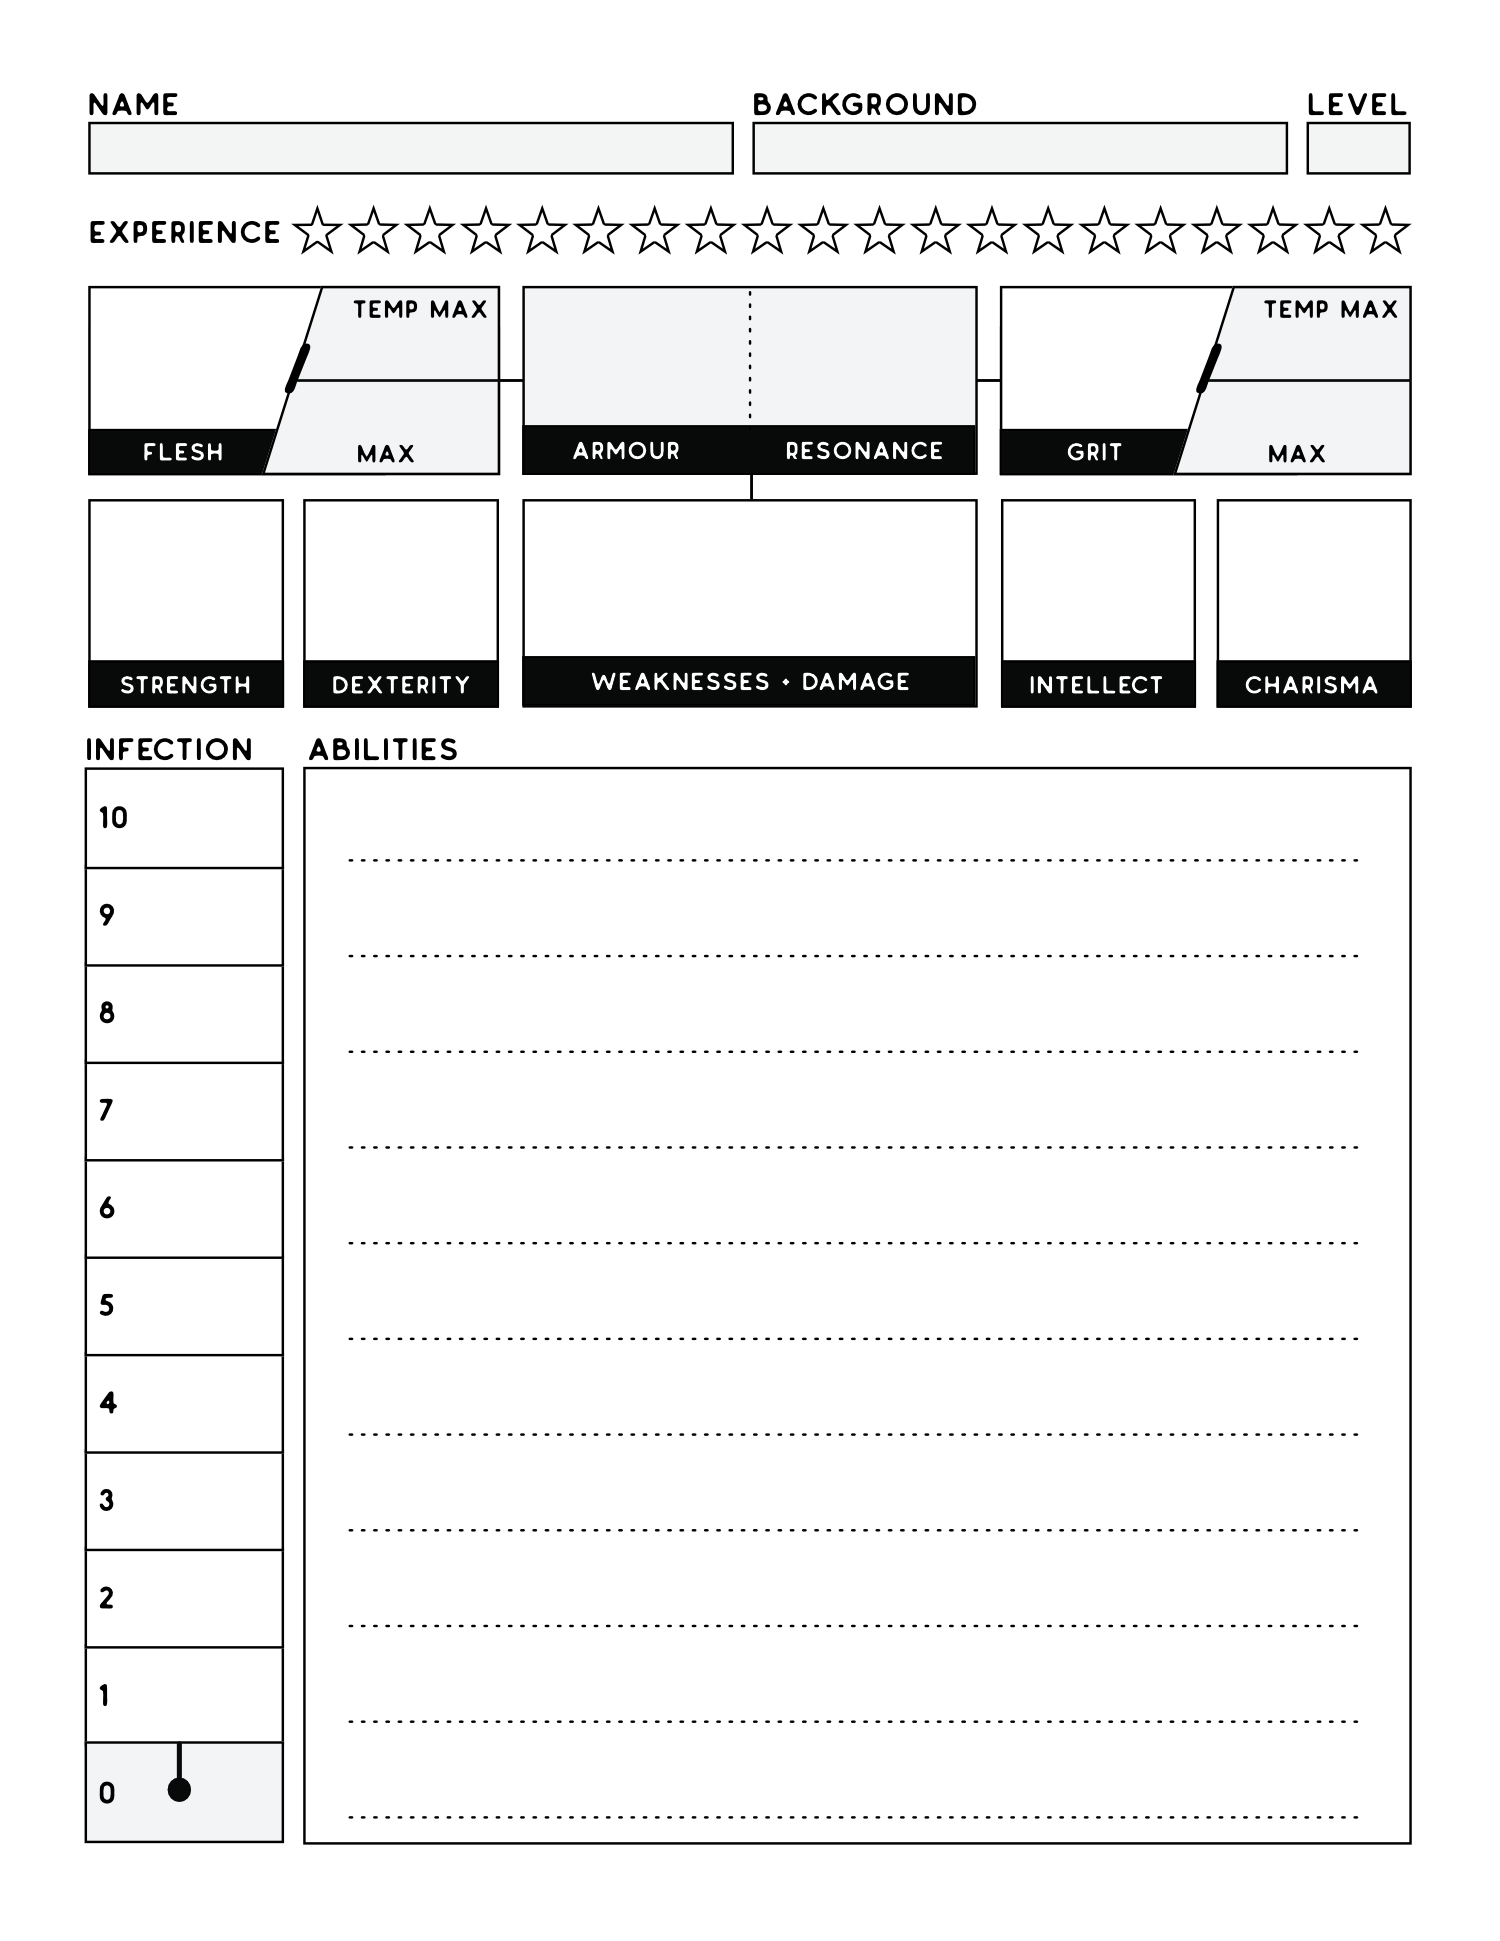 Updated character sheets